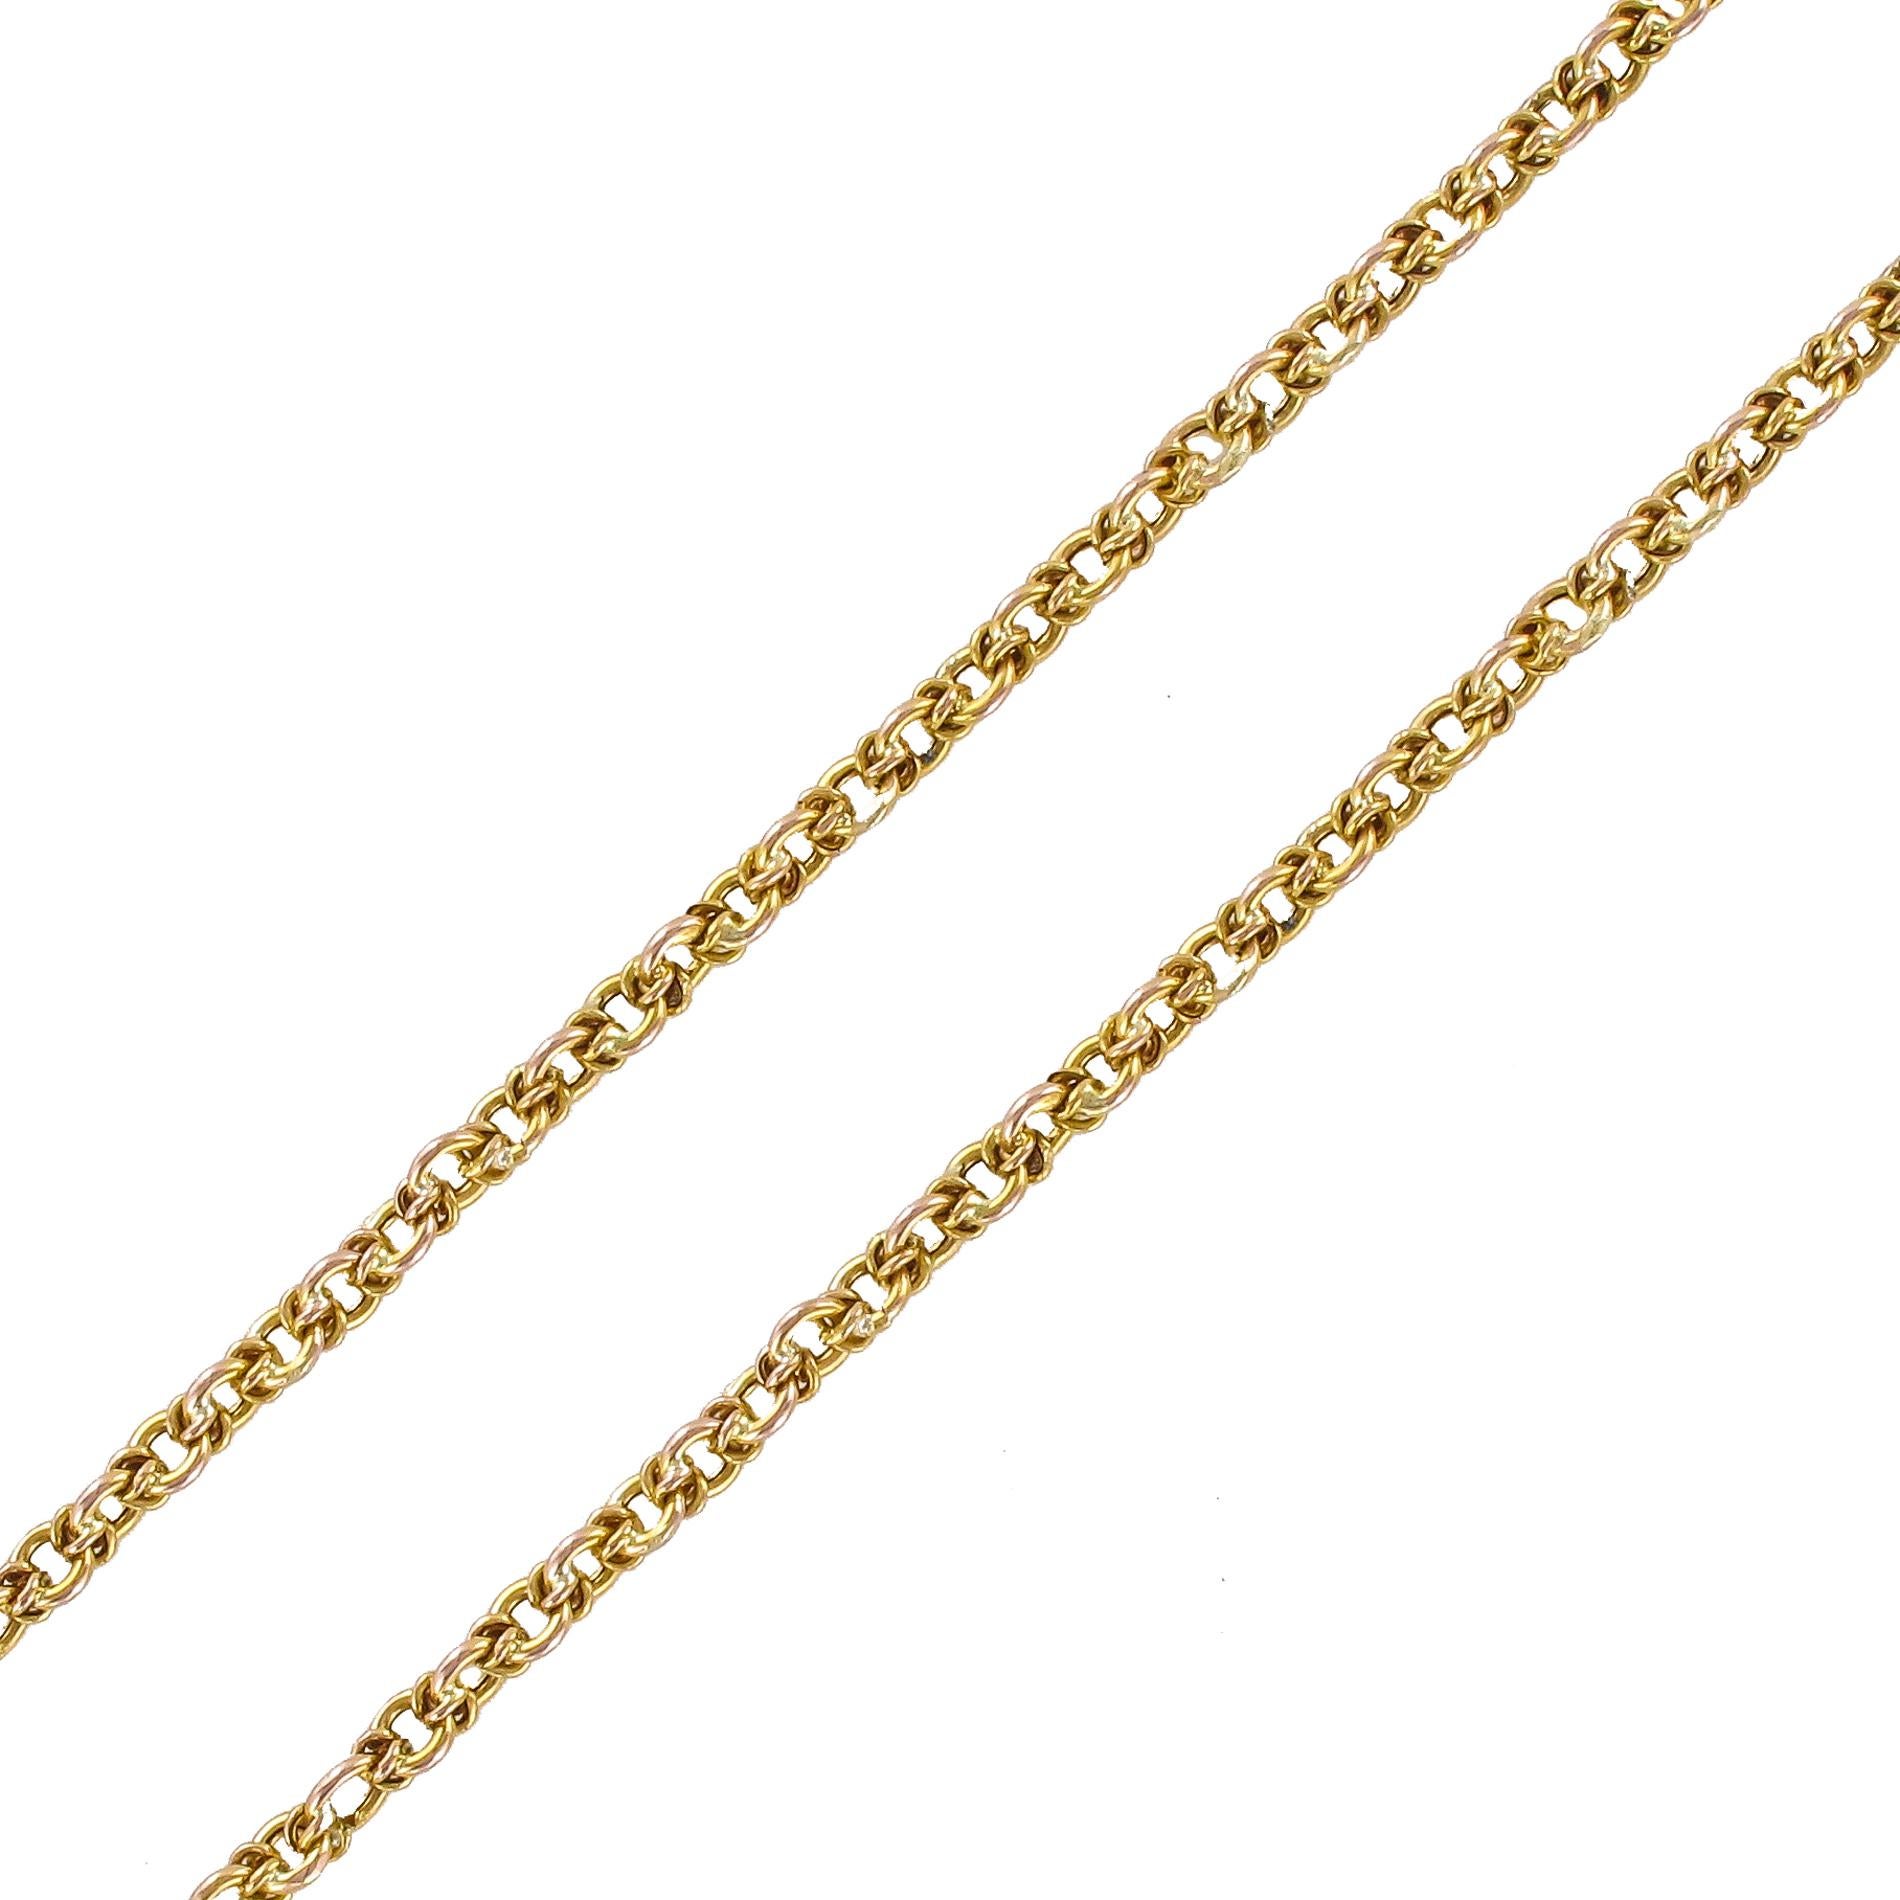 Necklace in 18 karats yellow gold, eagle's head hallmark.
This antique long chain necklace is composed of interlaced rings. The attachment system is a carabiner.
Length: 103.5 cm, width: 3.5 mm.
Total weight of the jewel: 25.7 g